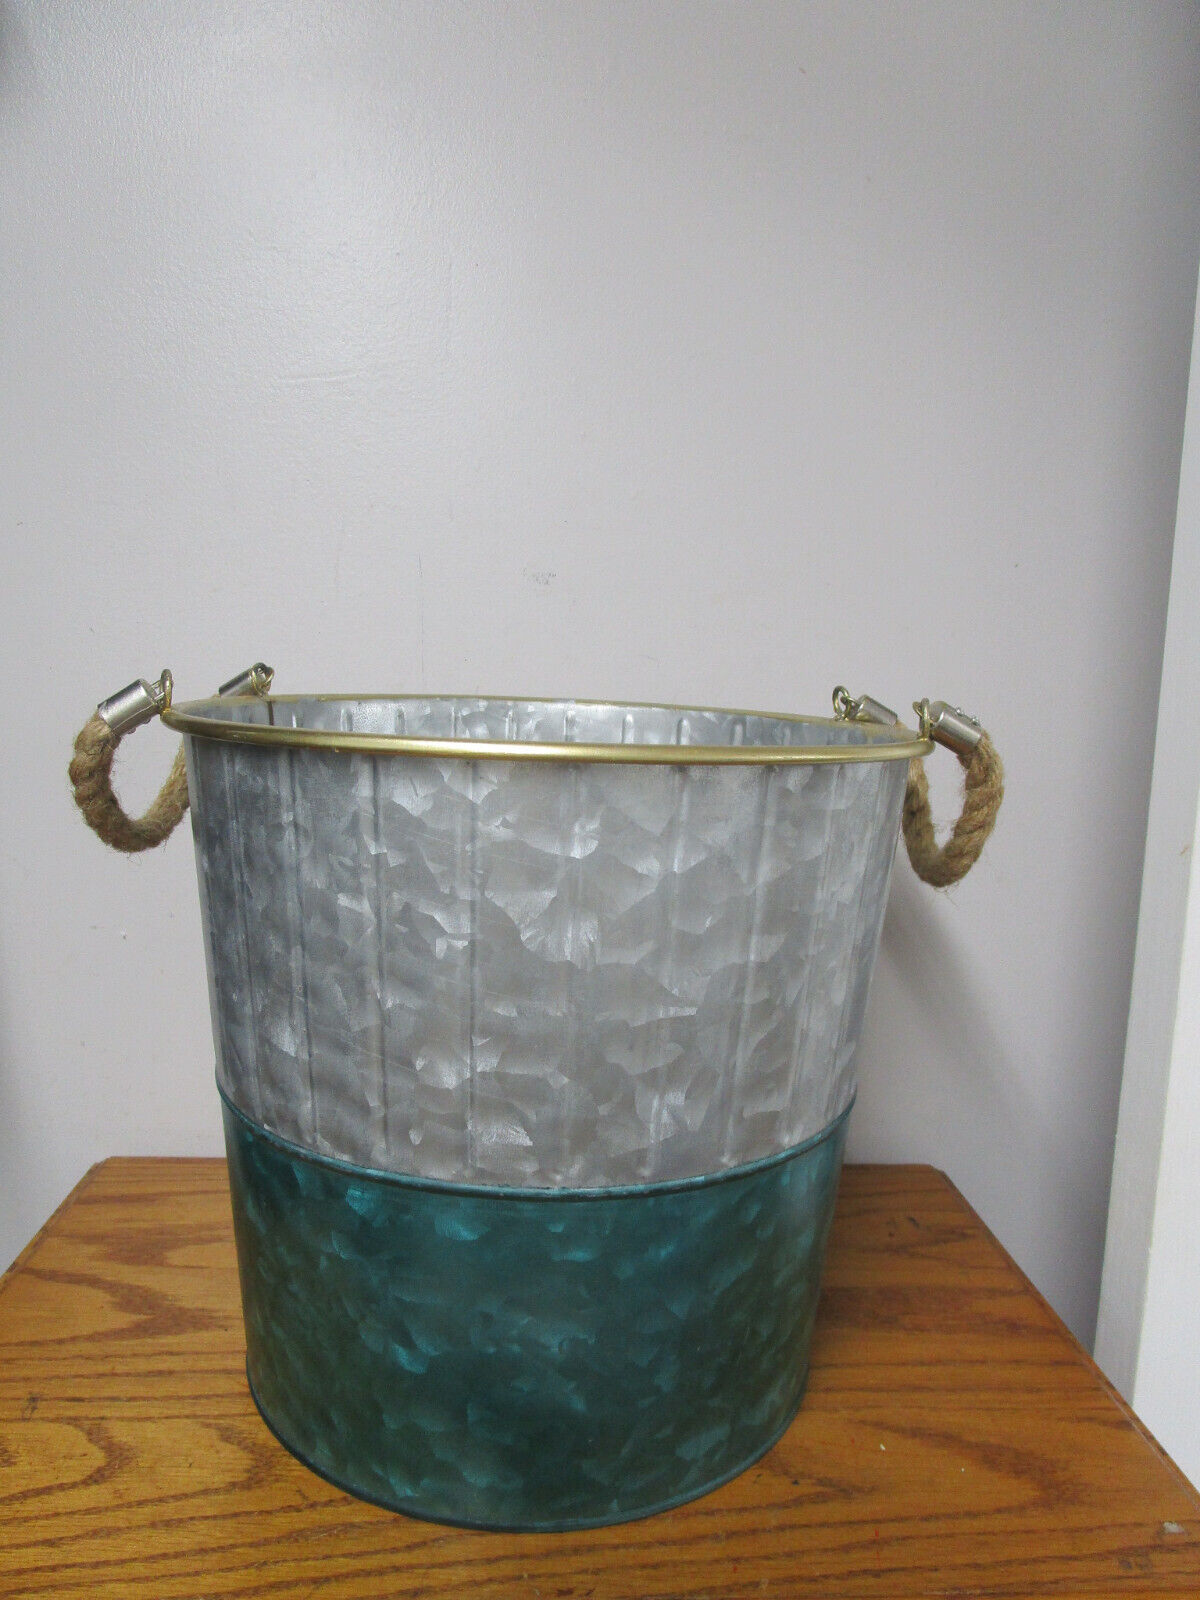 Galvanized Metal Bucket Garden Planter with Rope Handle and Gold Trim